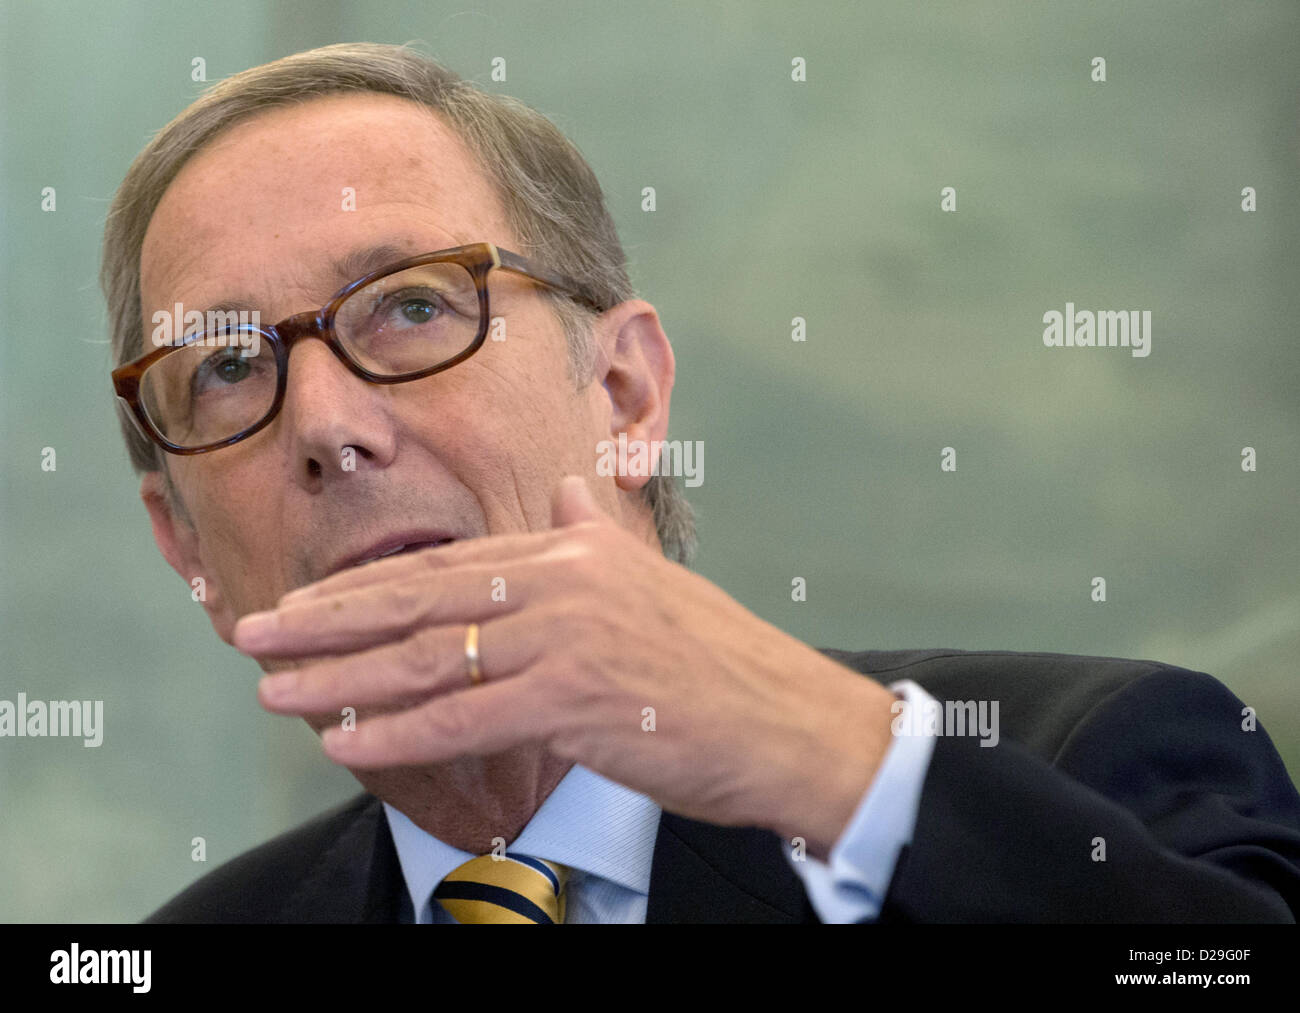 Download preview image - mayor-of-heilbronn-helmut-himmelsbach-takes-part-in-a-press-conference-D29G0F